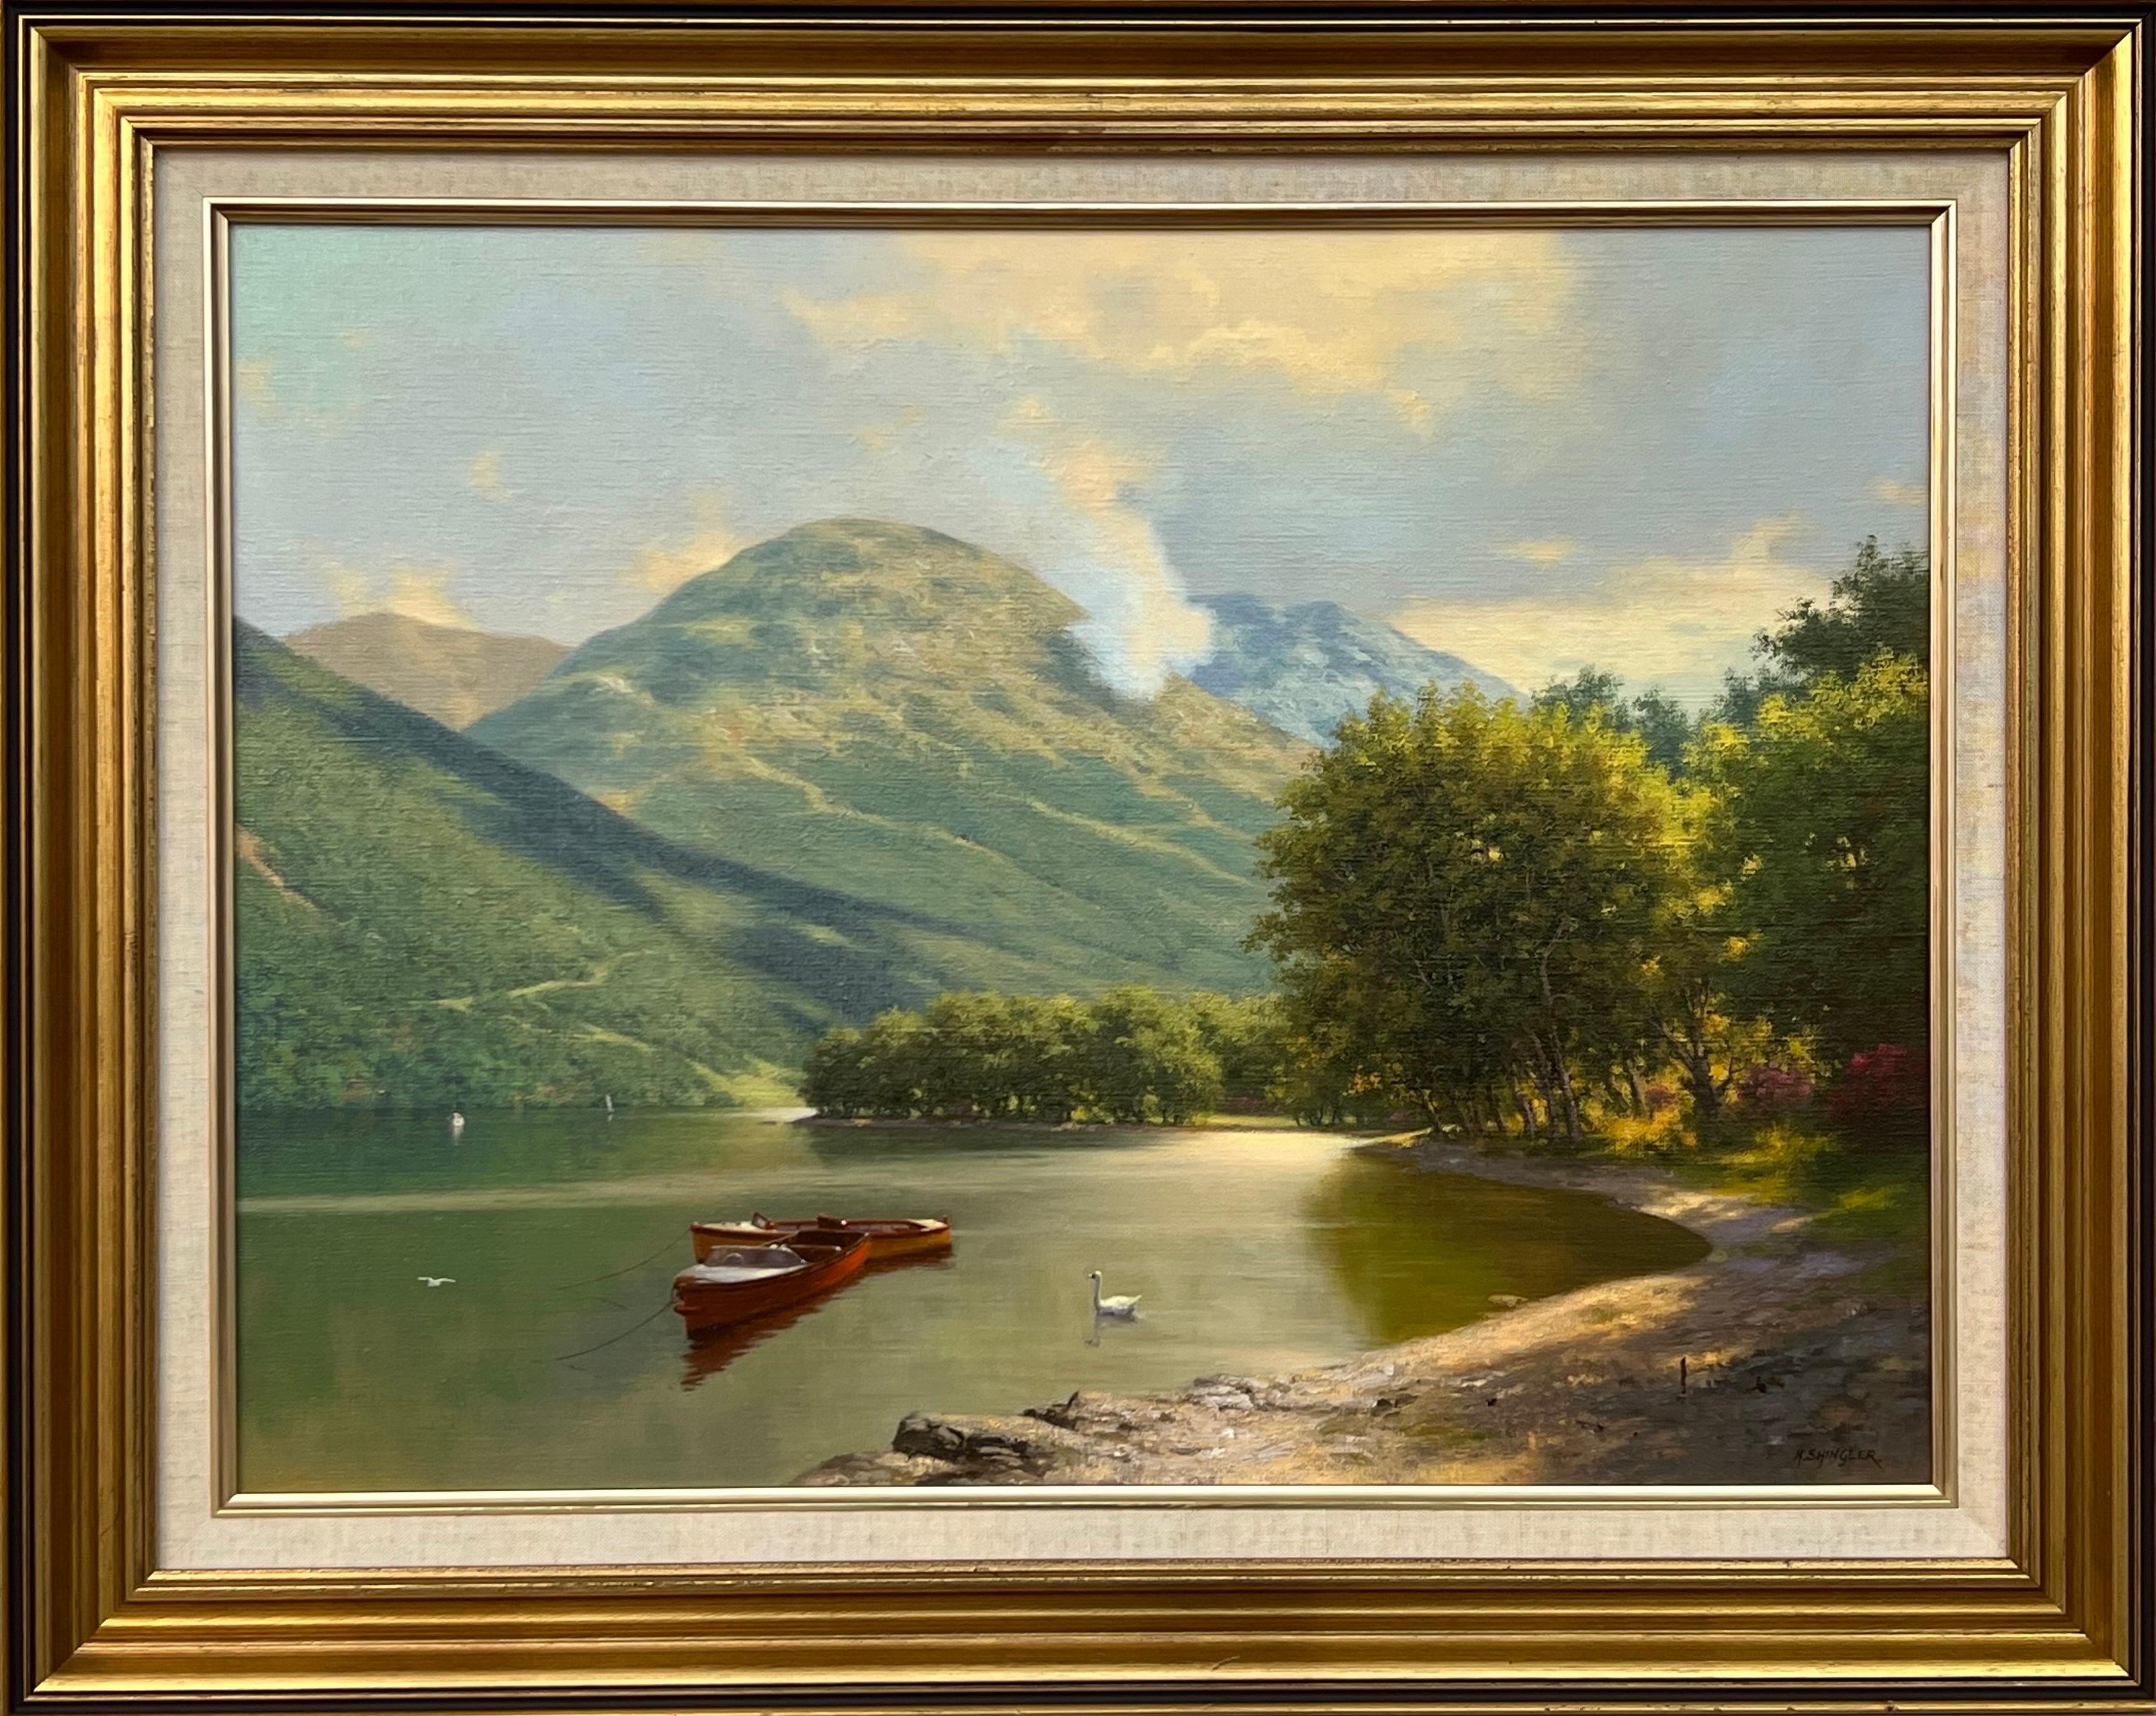 Howard Shingler Animal Painting - Tranquil Lake Scene with Boats & Swan in the Mountains of the Scottish Highlands